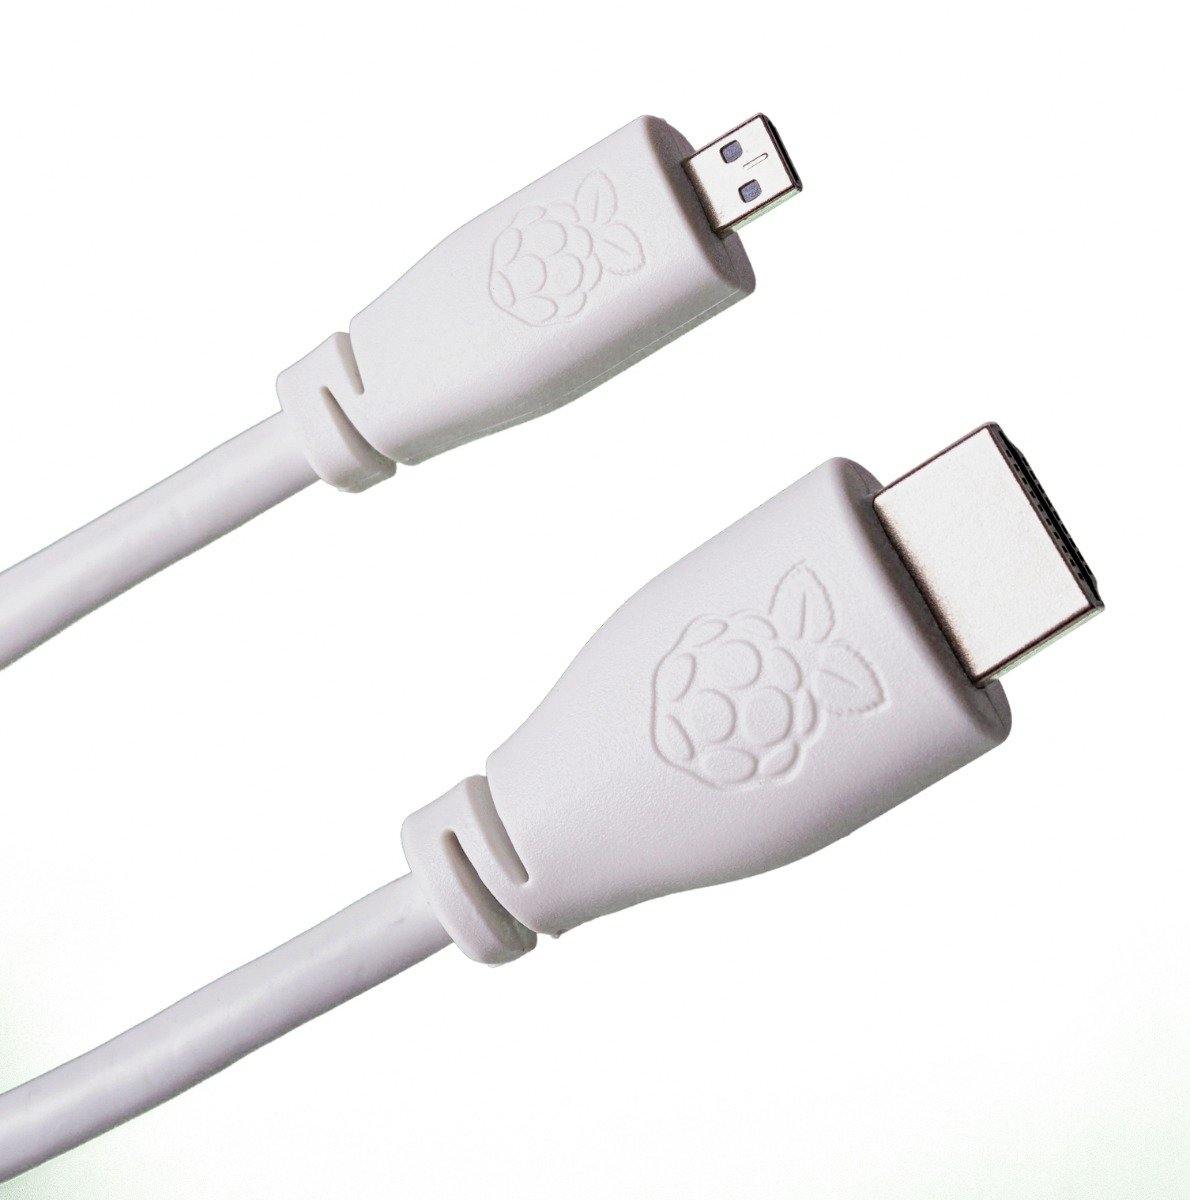 Raspberry Pi Official Micro-HDMI to Standard HDMI Cable